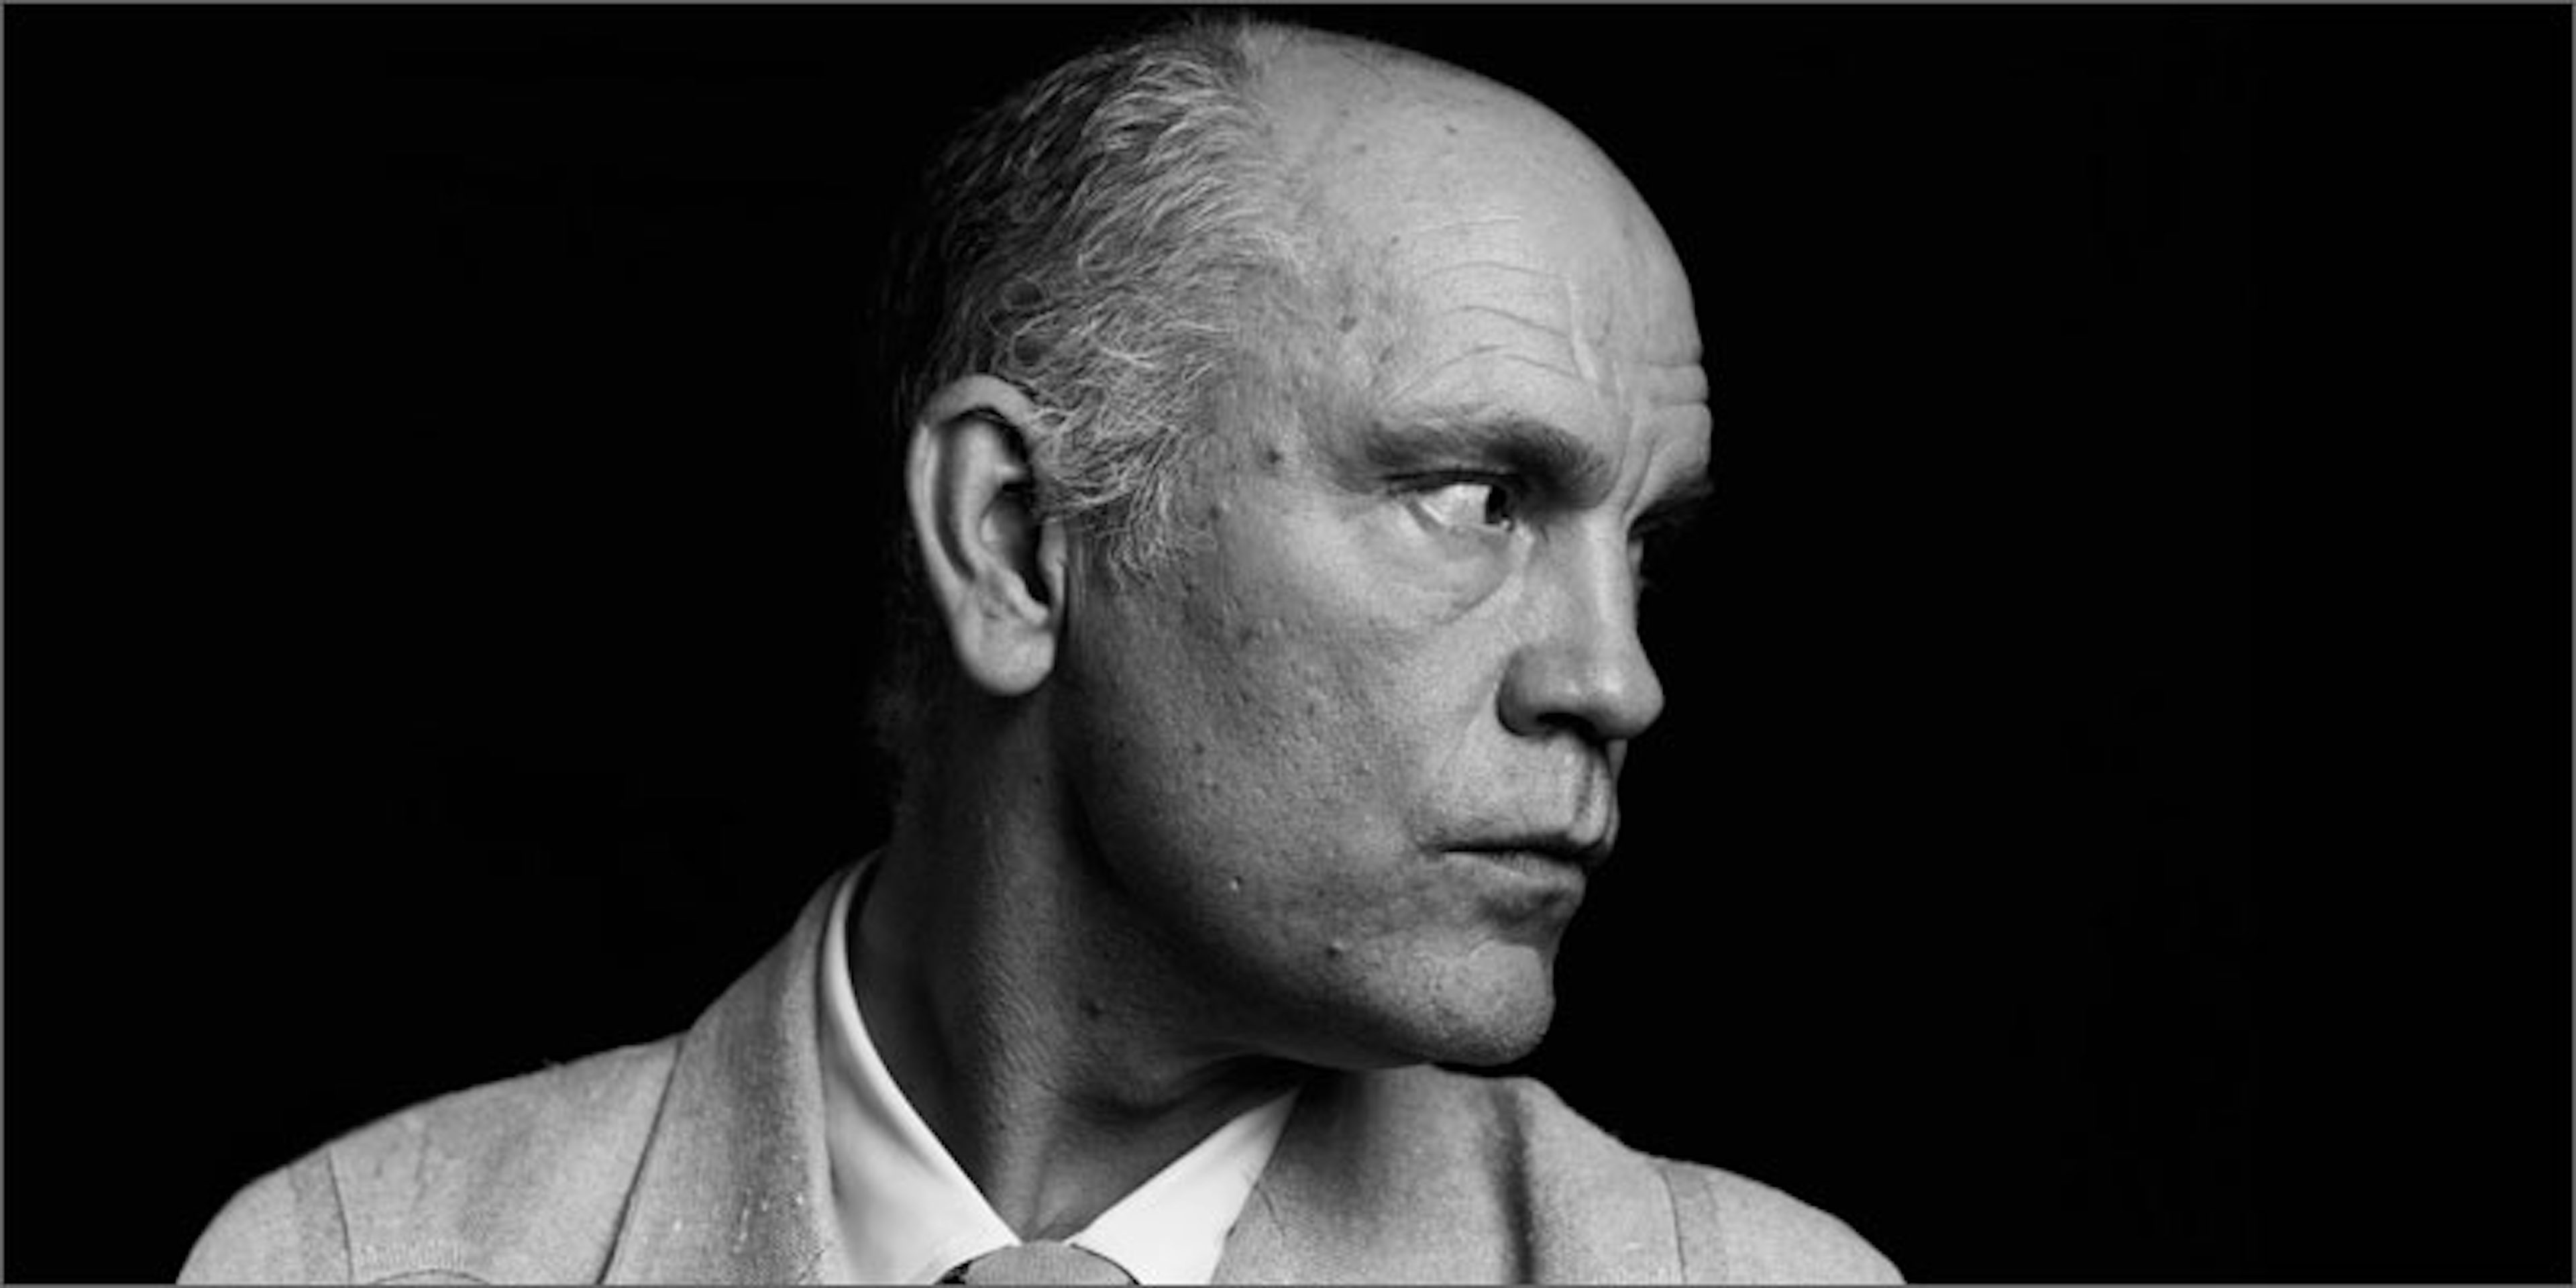 John Malkovich Is The Latest Star To Move Into Cannabis Herb